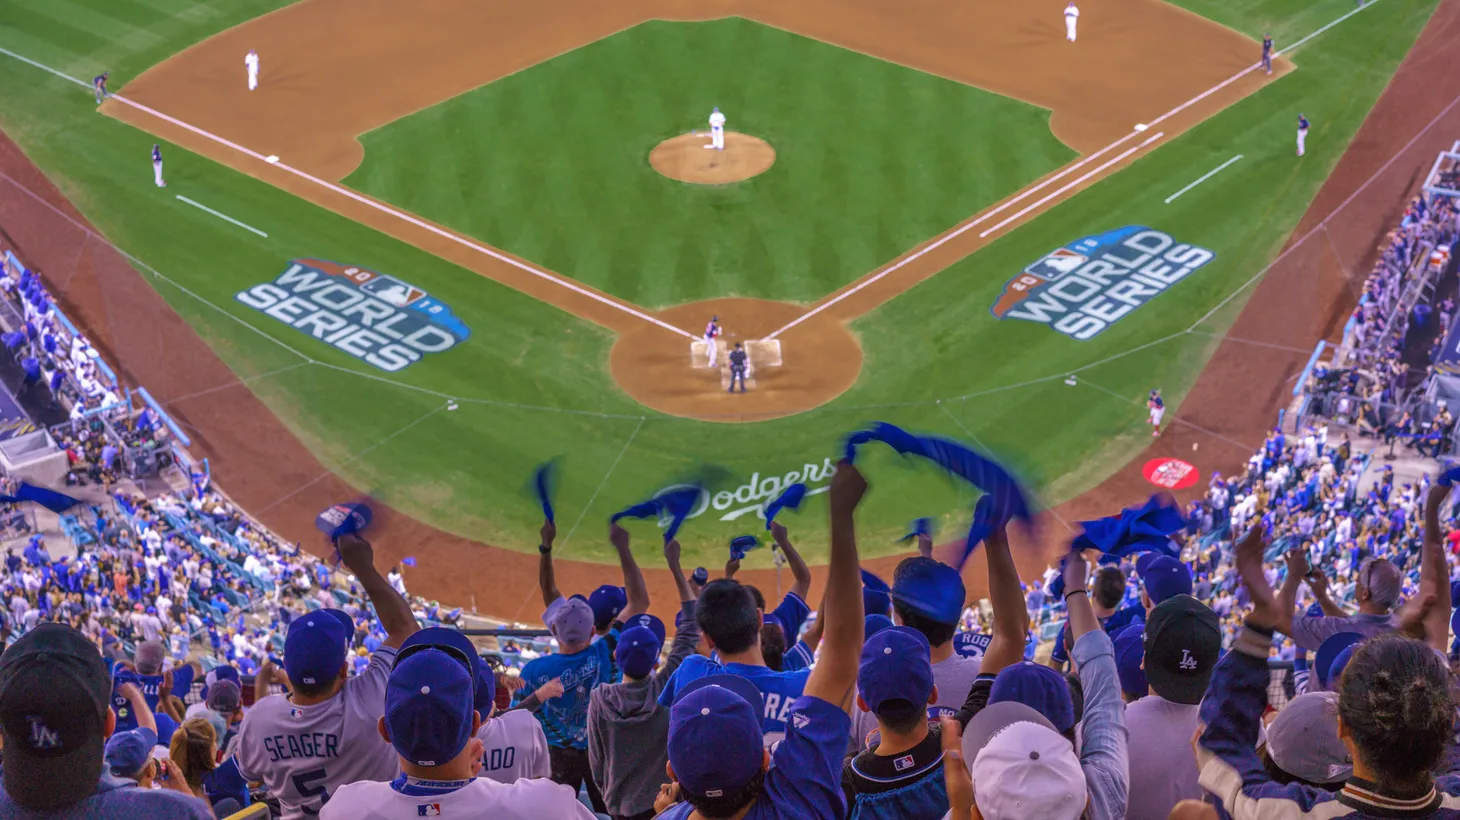 OCTOBER 26, 2018 - LOS ANGELES, CALIFORNIA, USA - DODGER STADIUM: fans celebrate as LA Dodgers defeat Boston Red Sox 3-2 in game 3, the longest game in World Series History